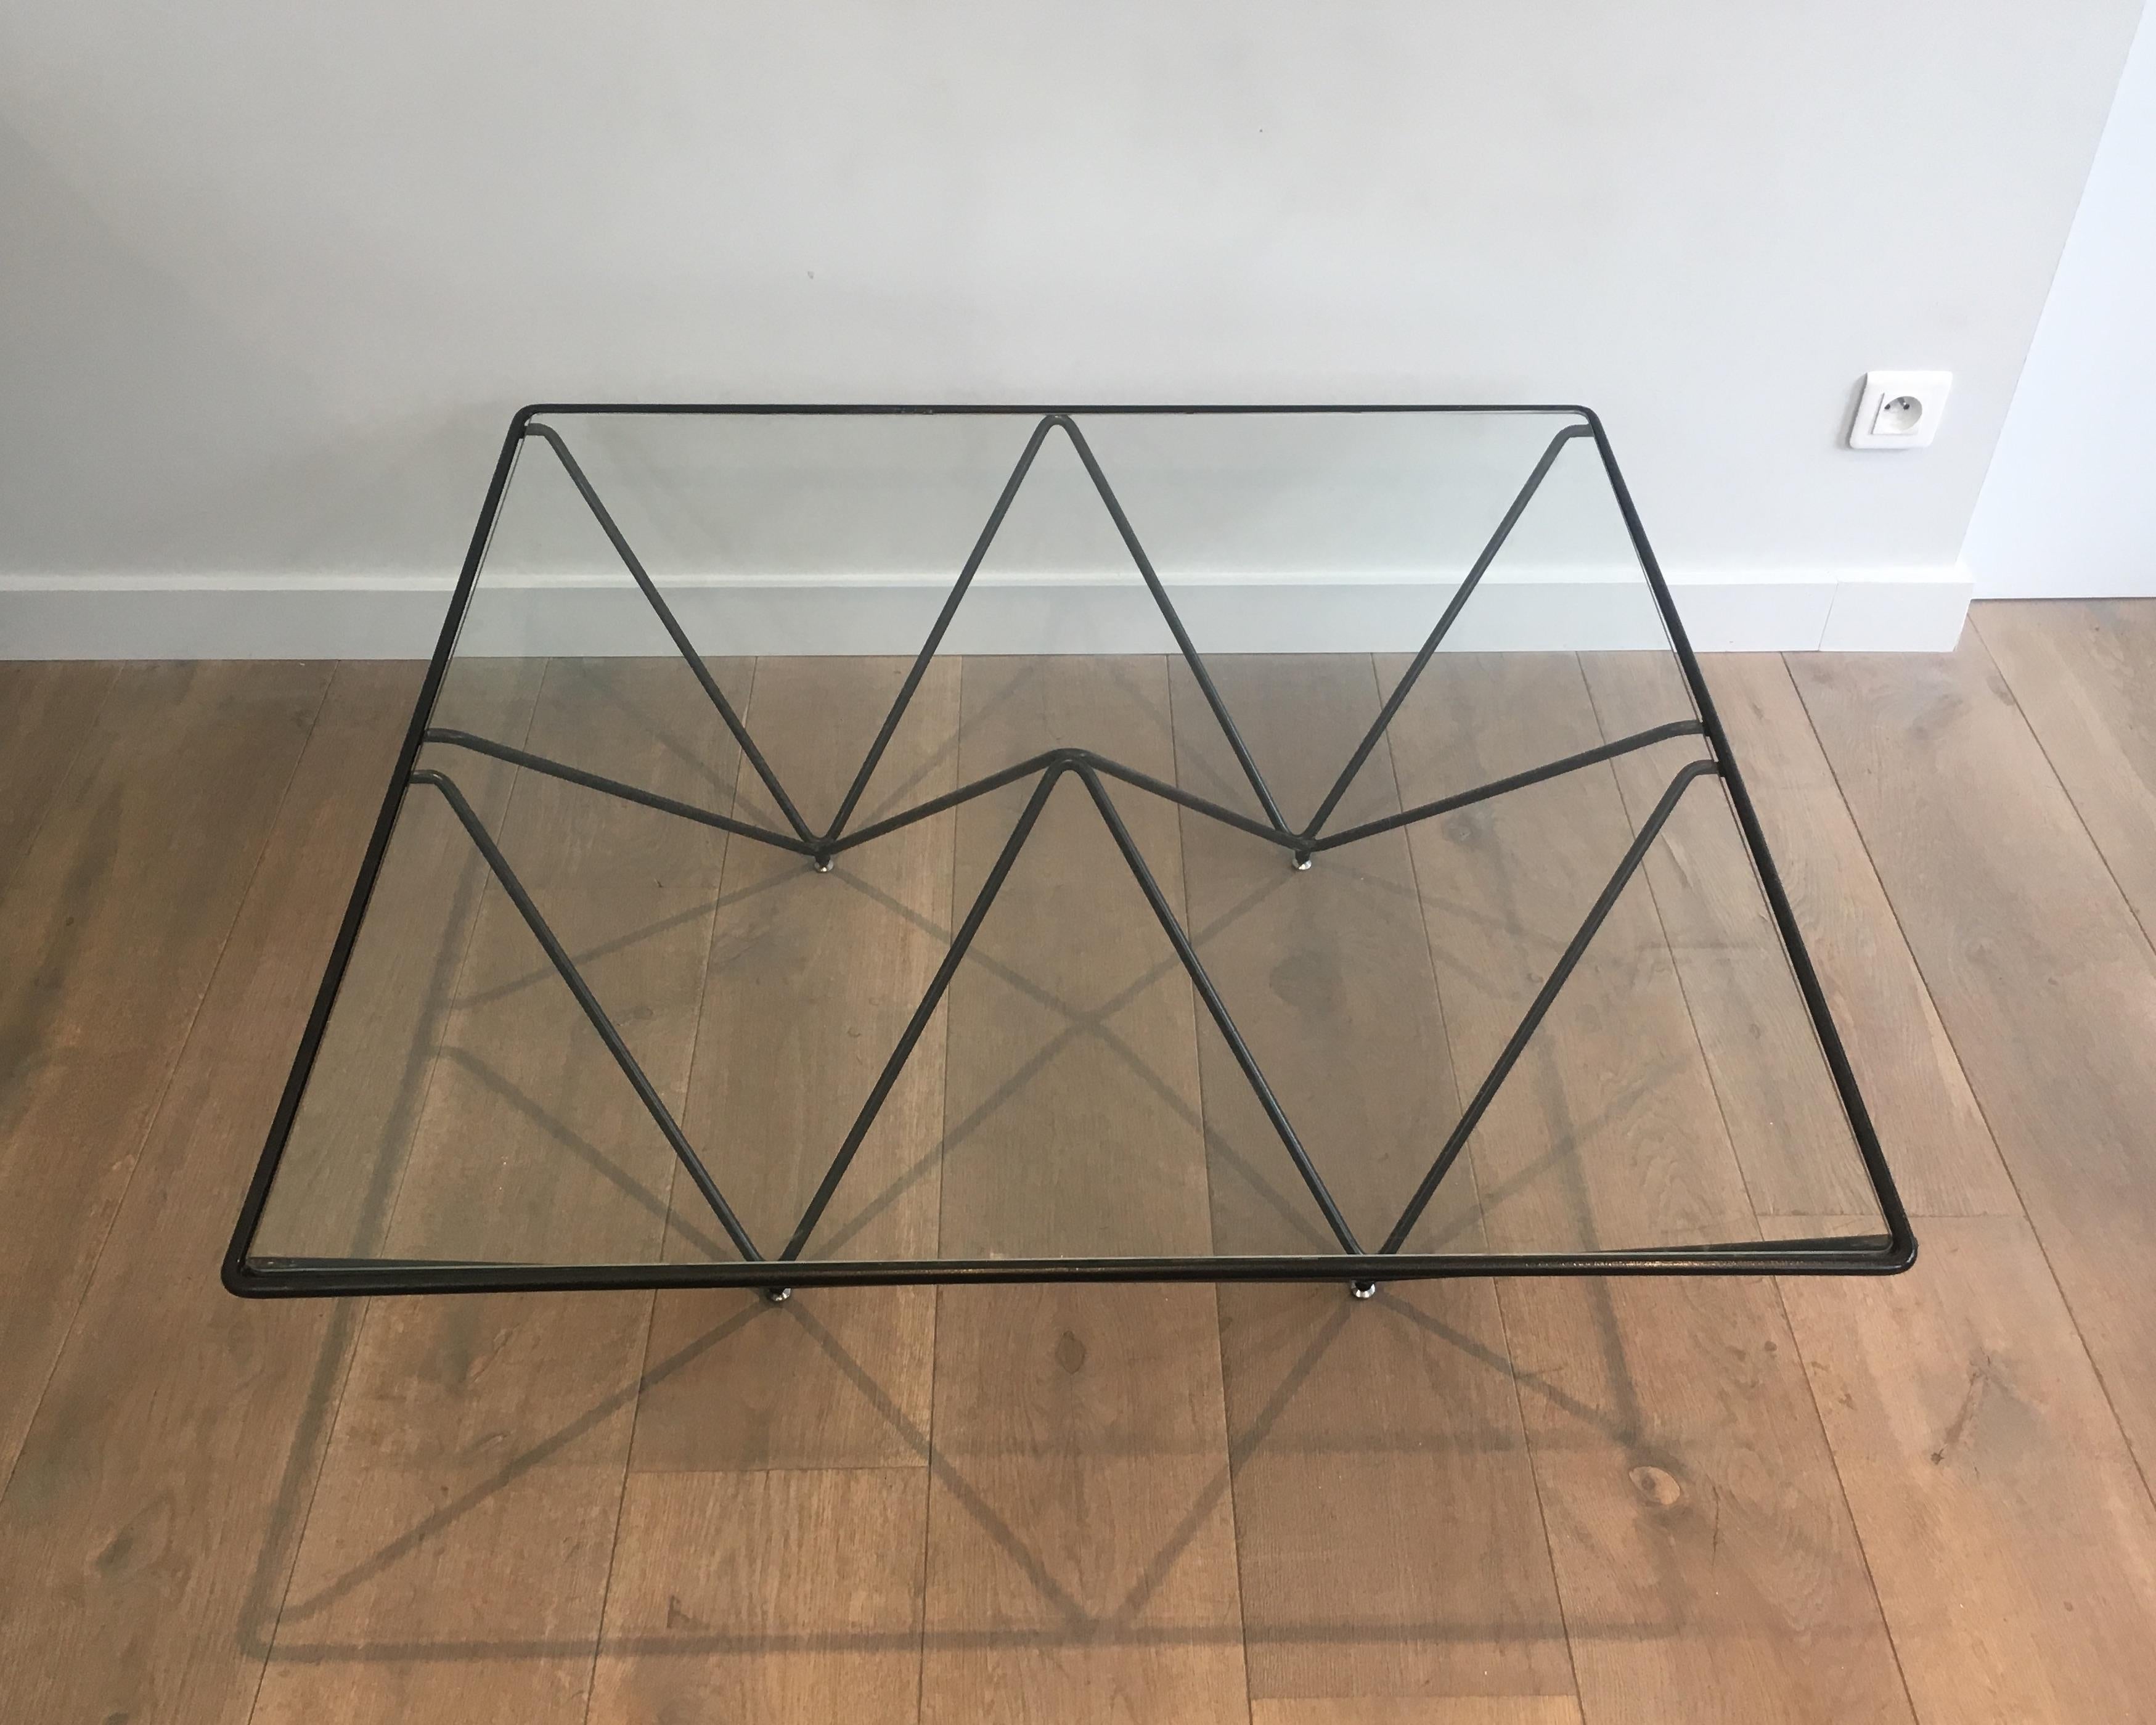 This very nice coffee table is made of black lacquered metal. It has a pyramidal shape with a clear glass on top. This is an iconic model in the style of famous Italian designer Paolo Piva, Italy, circa 1970.